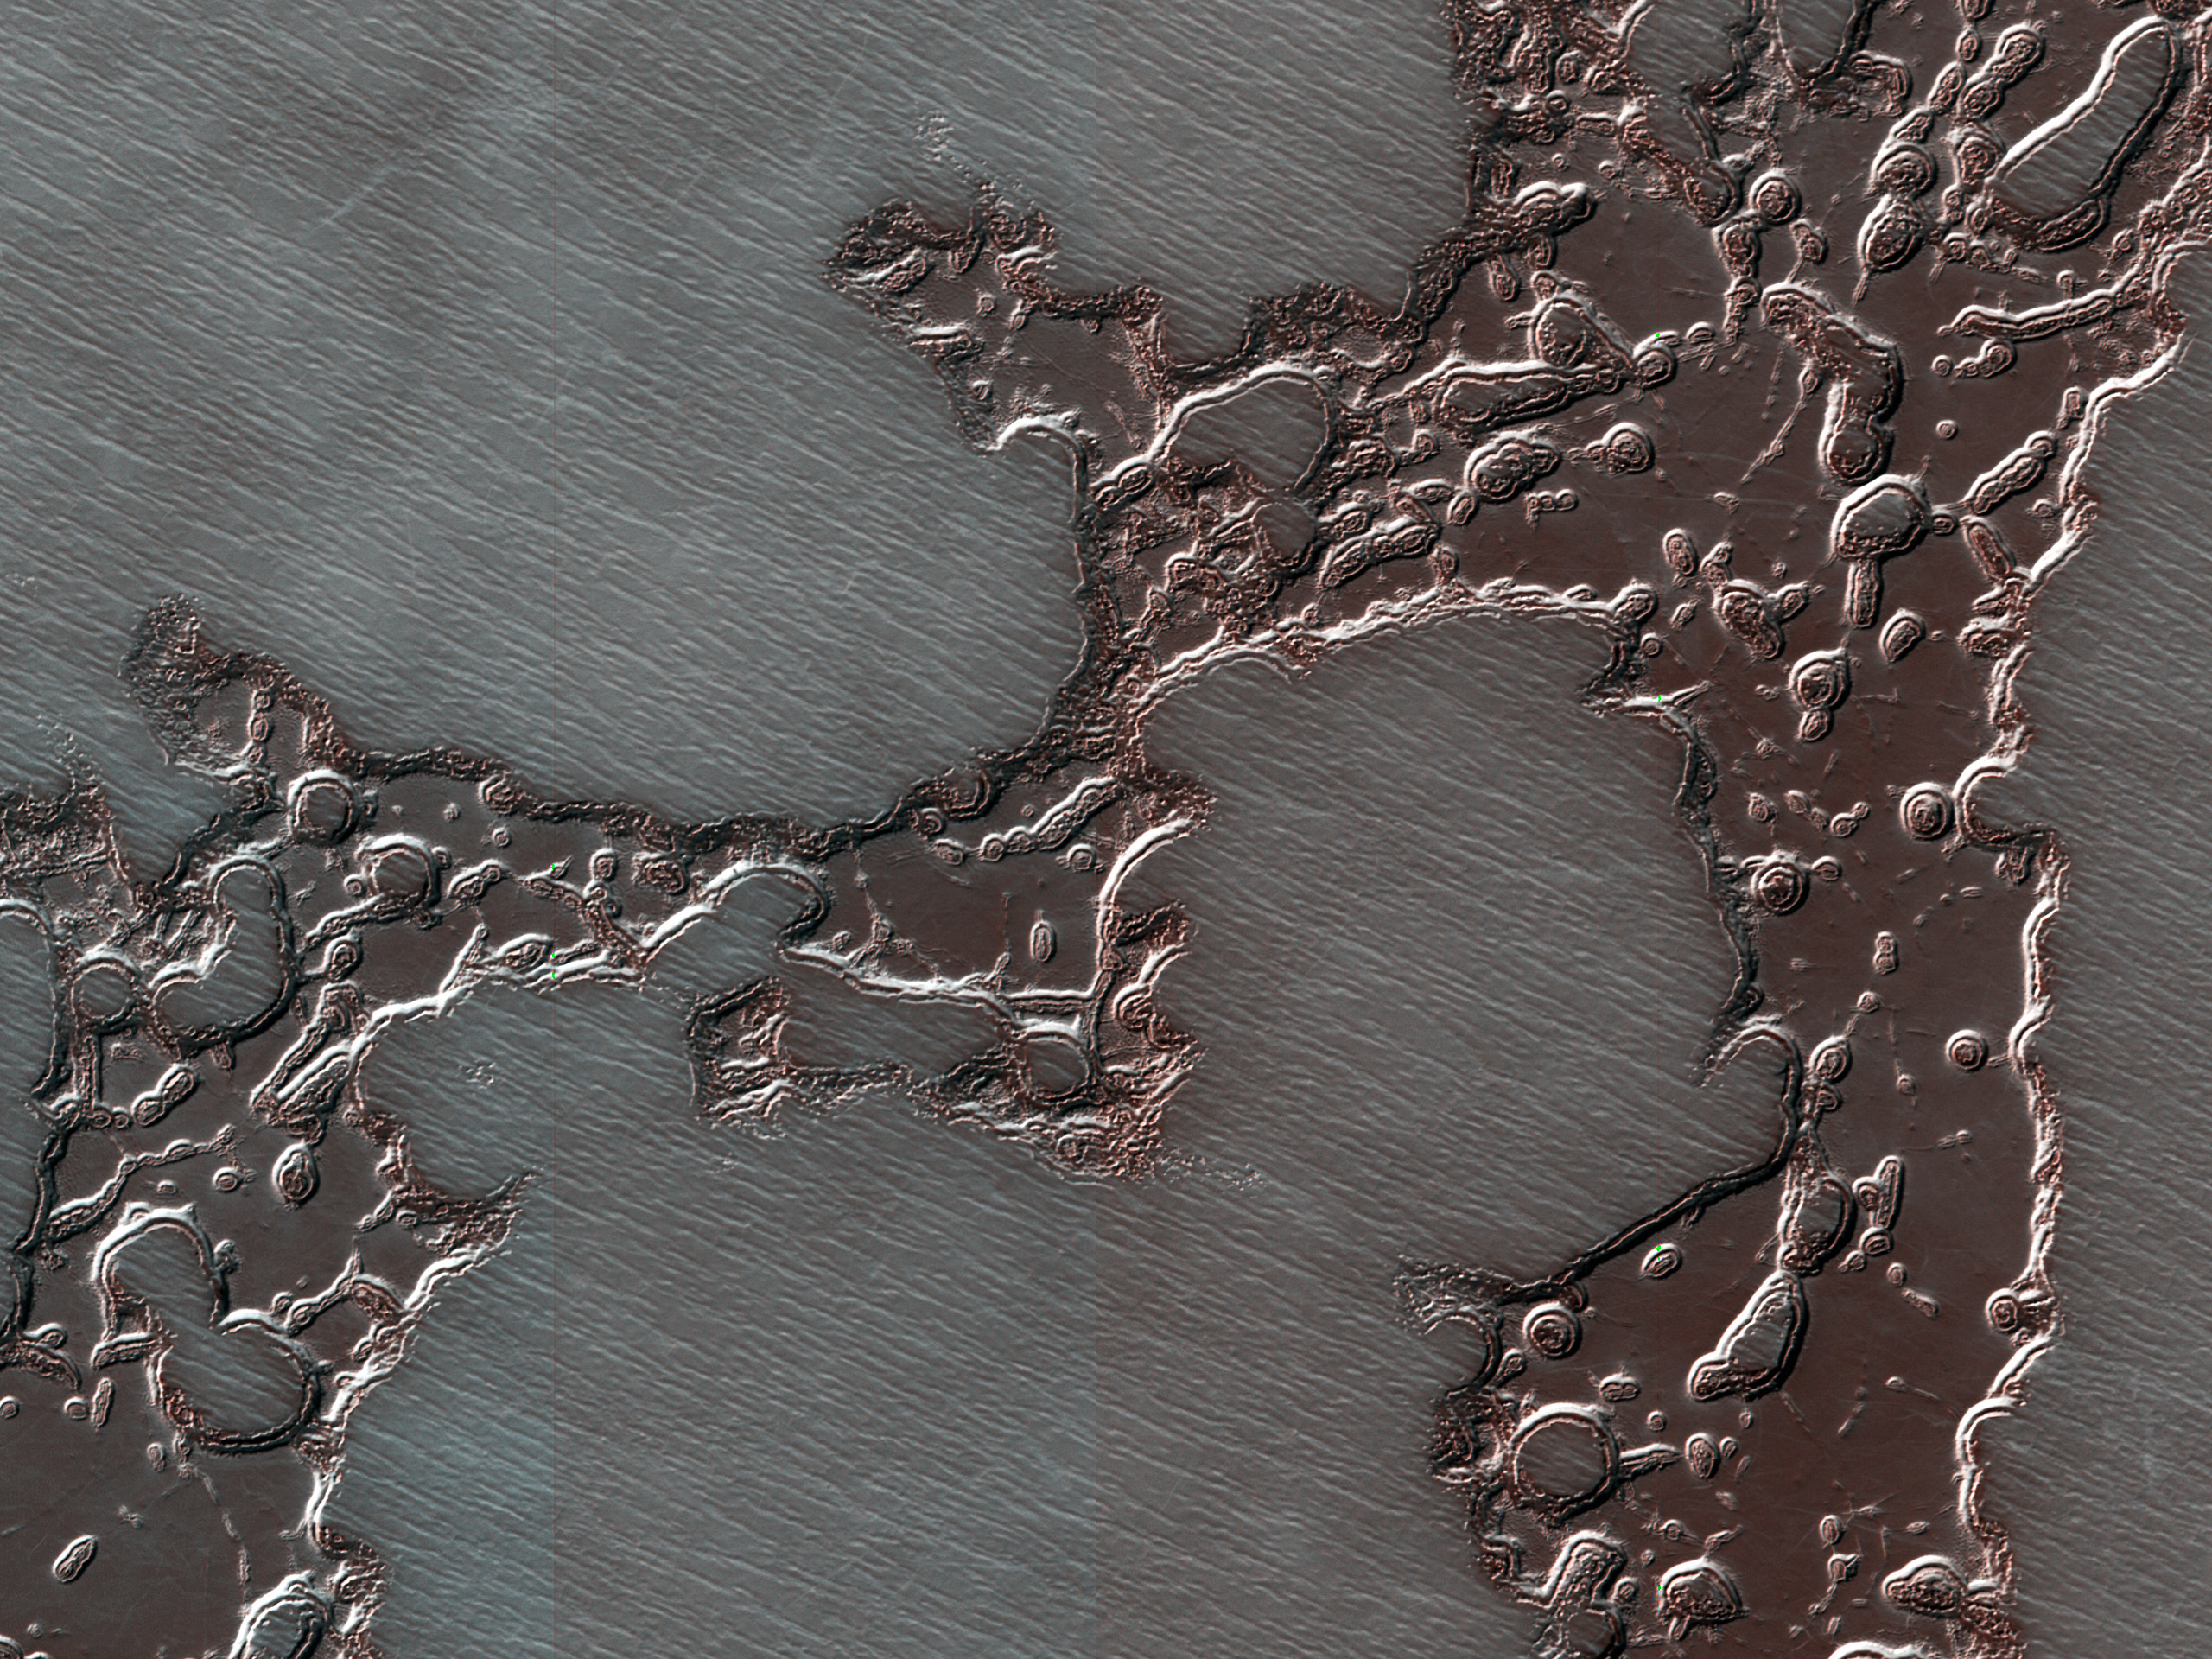 The Changing Ice Cap of Mars